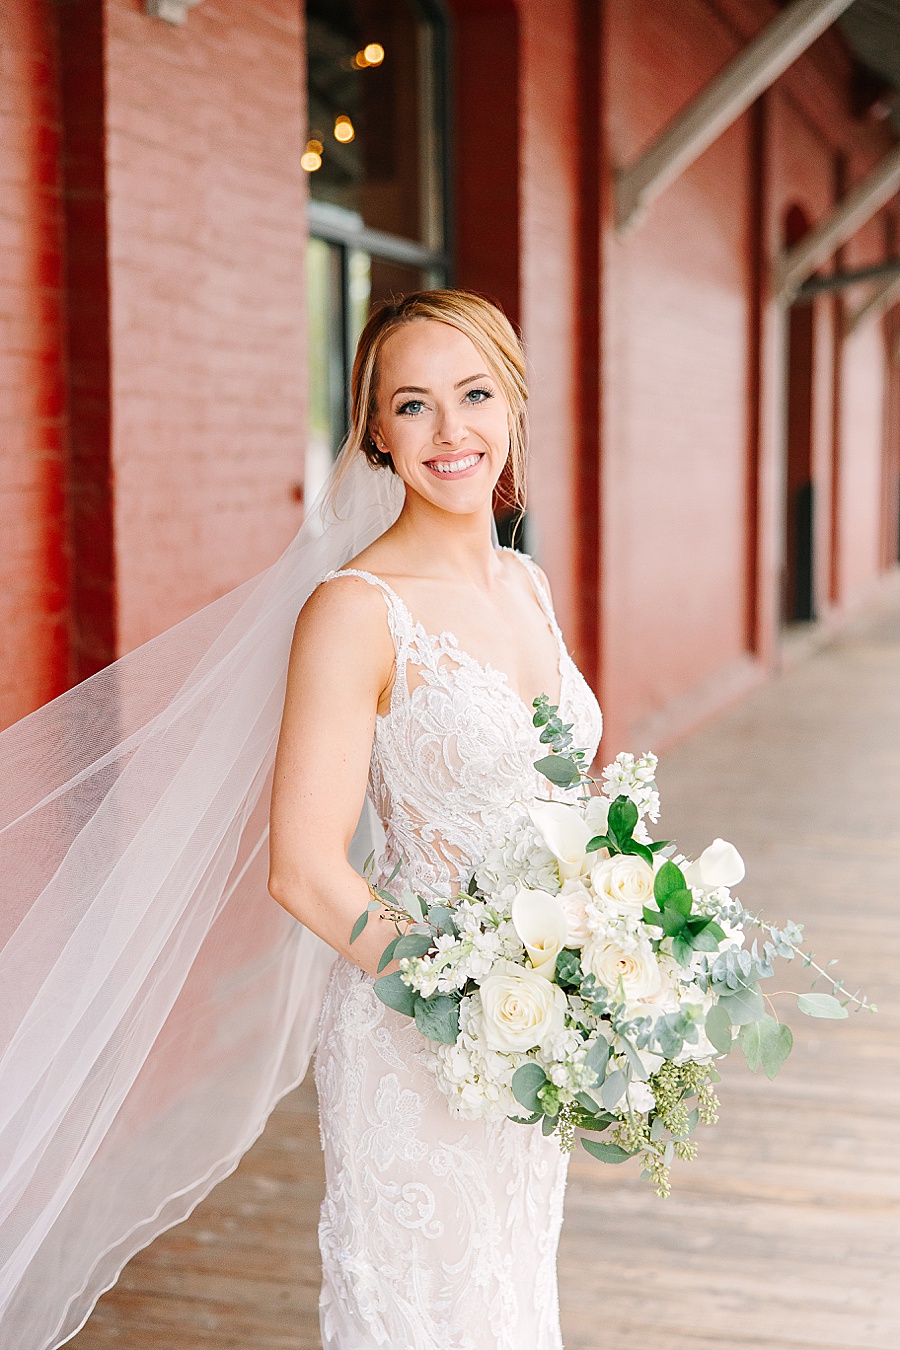 Bridal portrait in lace bridal gown at Jackson Terminal in Knoxville TN by Mandy Hart Photo, Knoxville TN Wedding Photographer